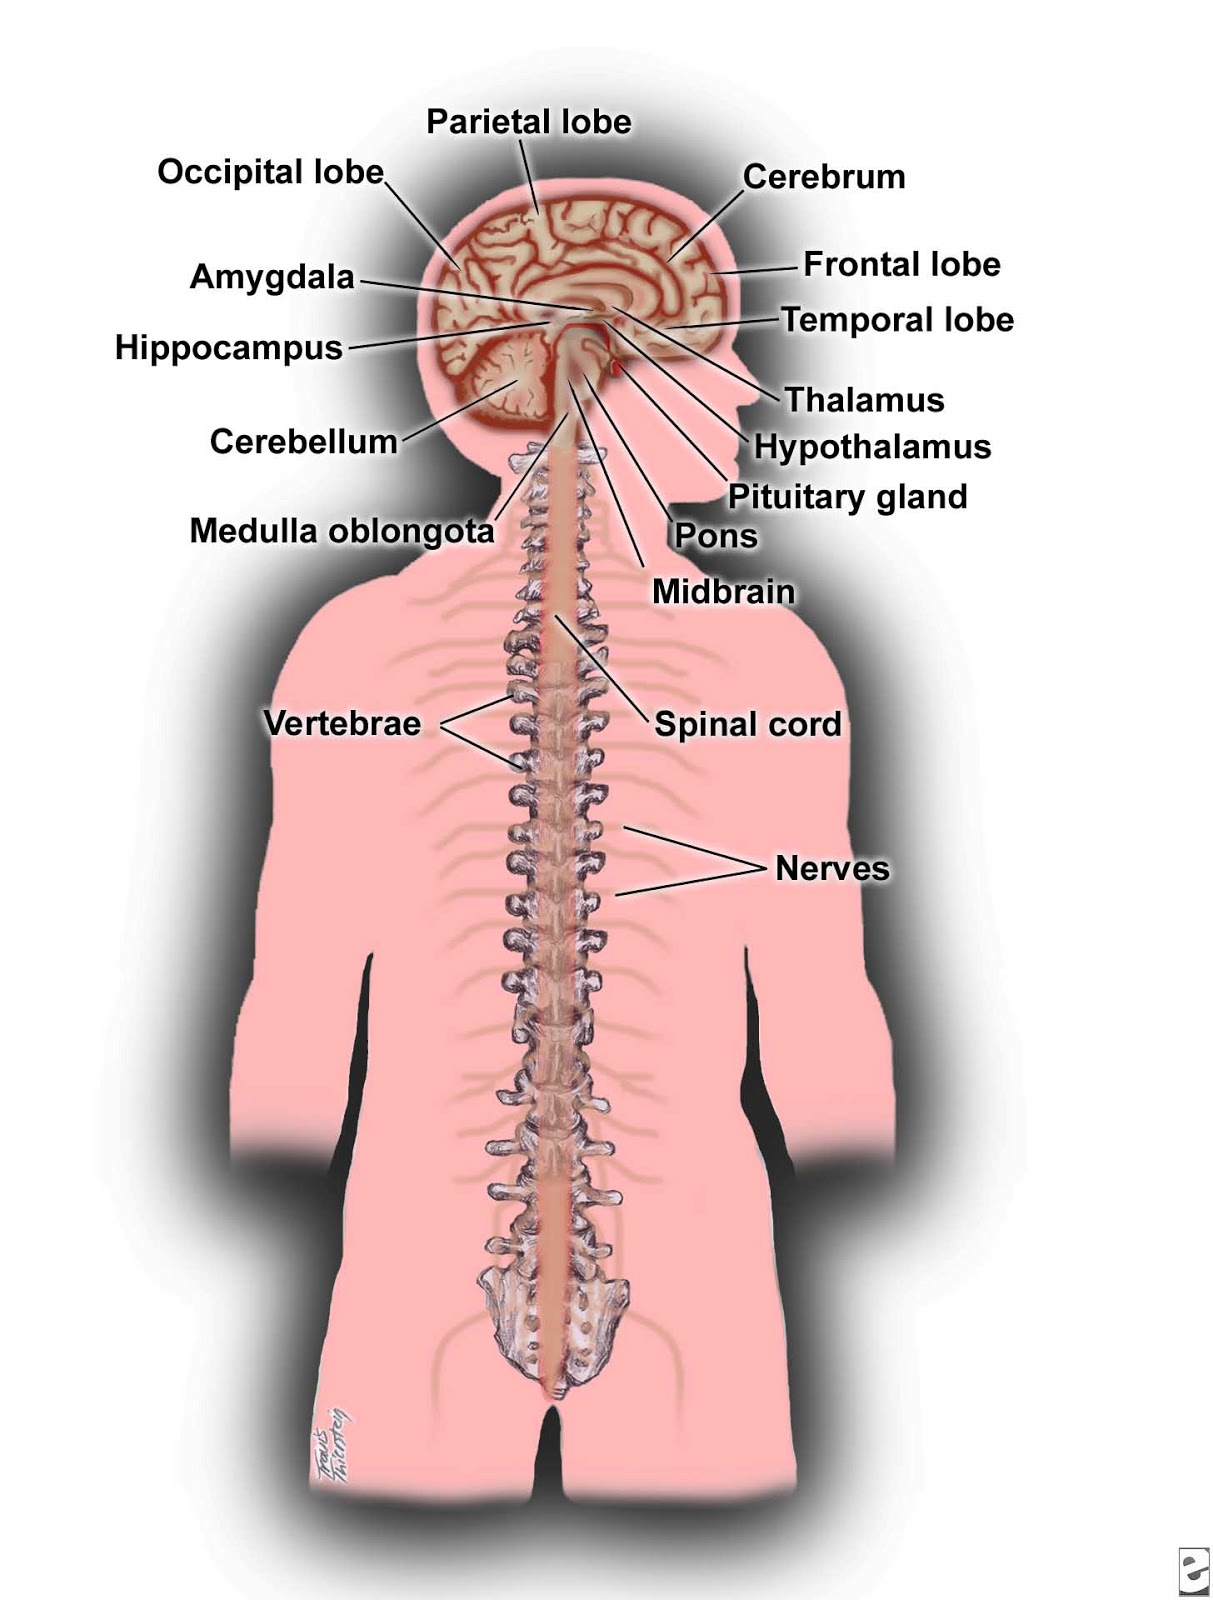 Human Body Systems and their Organs: Nervous System